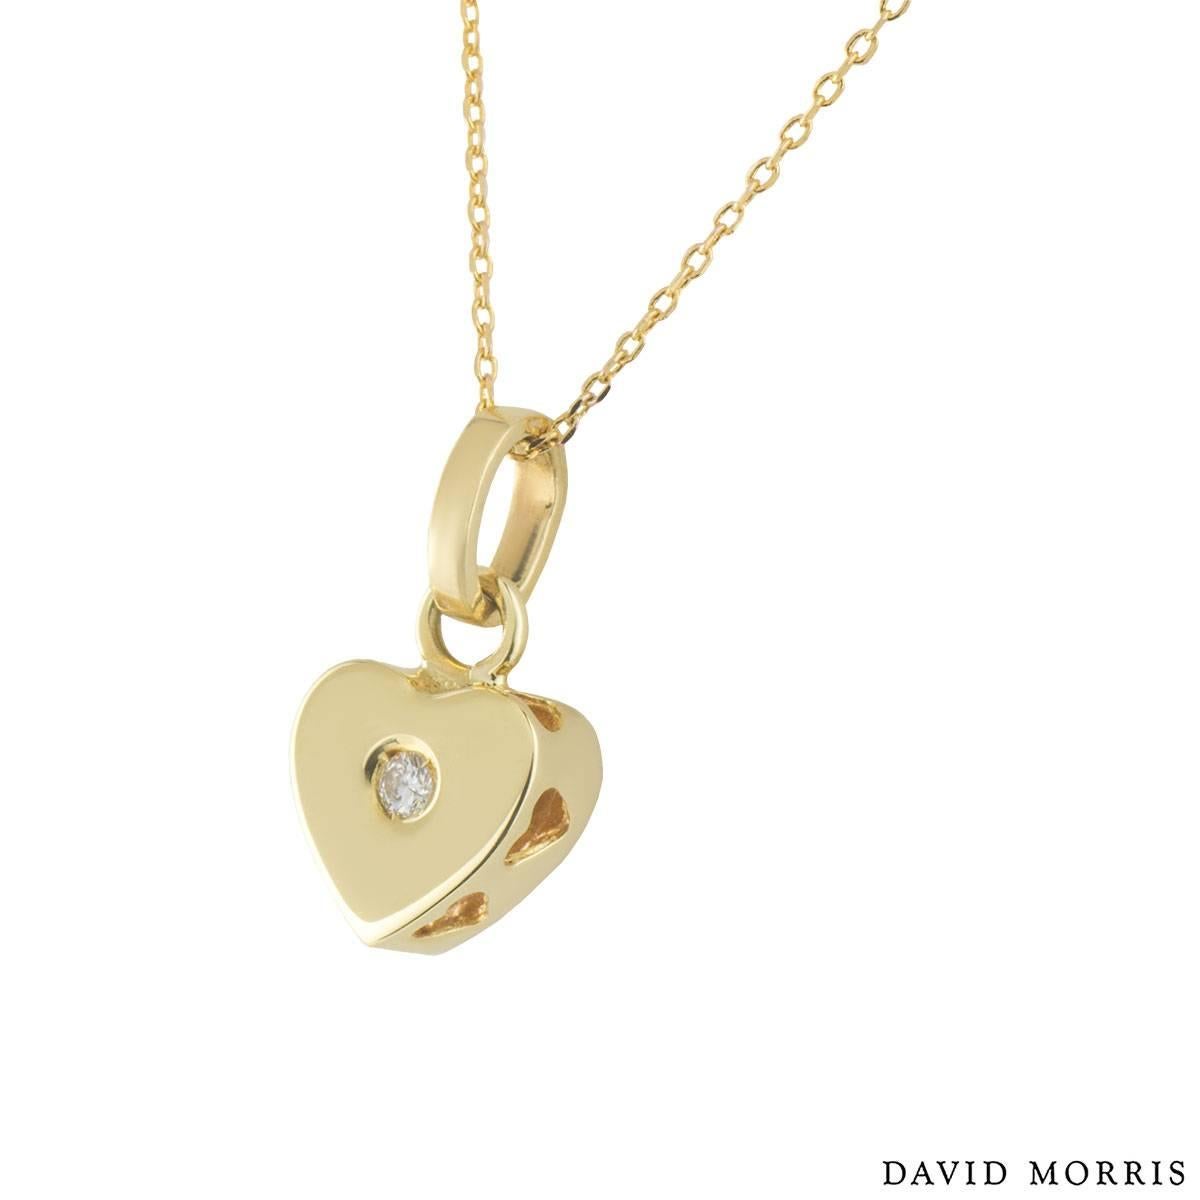 A beautiful 18k yellow gold diamond David Morris pendant. The pendant comprises of a heart motif with a round brilliant diamond in a rubover setting. Complementing the pendant is another round brilliant cut diamond on the other side in a white gold